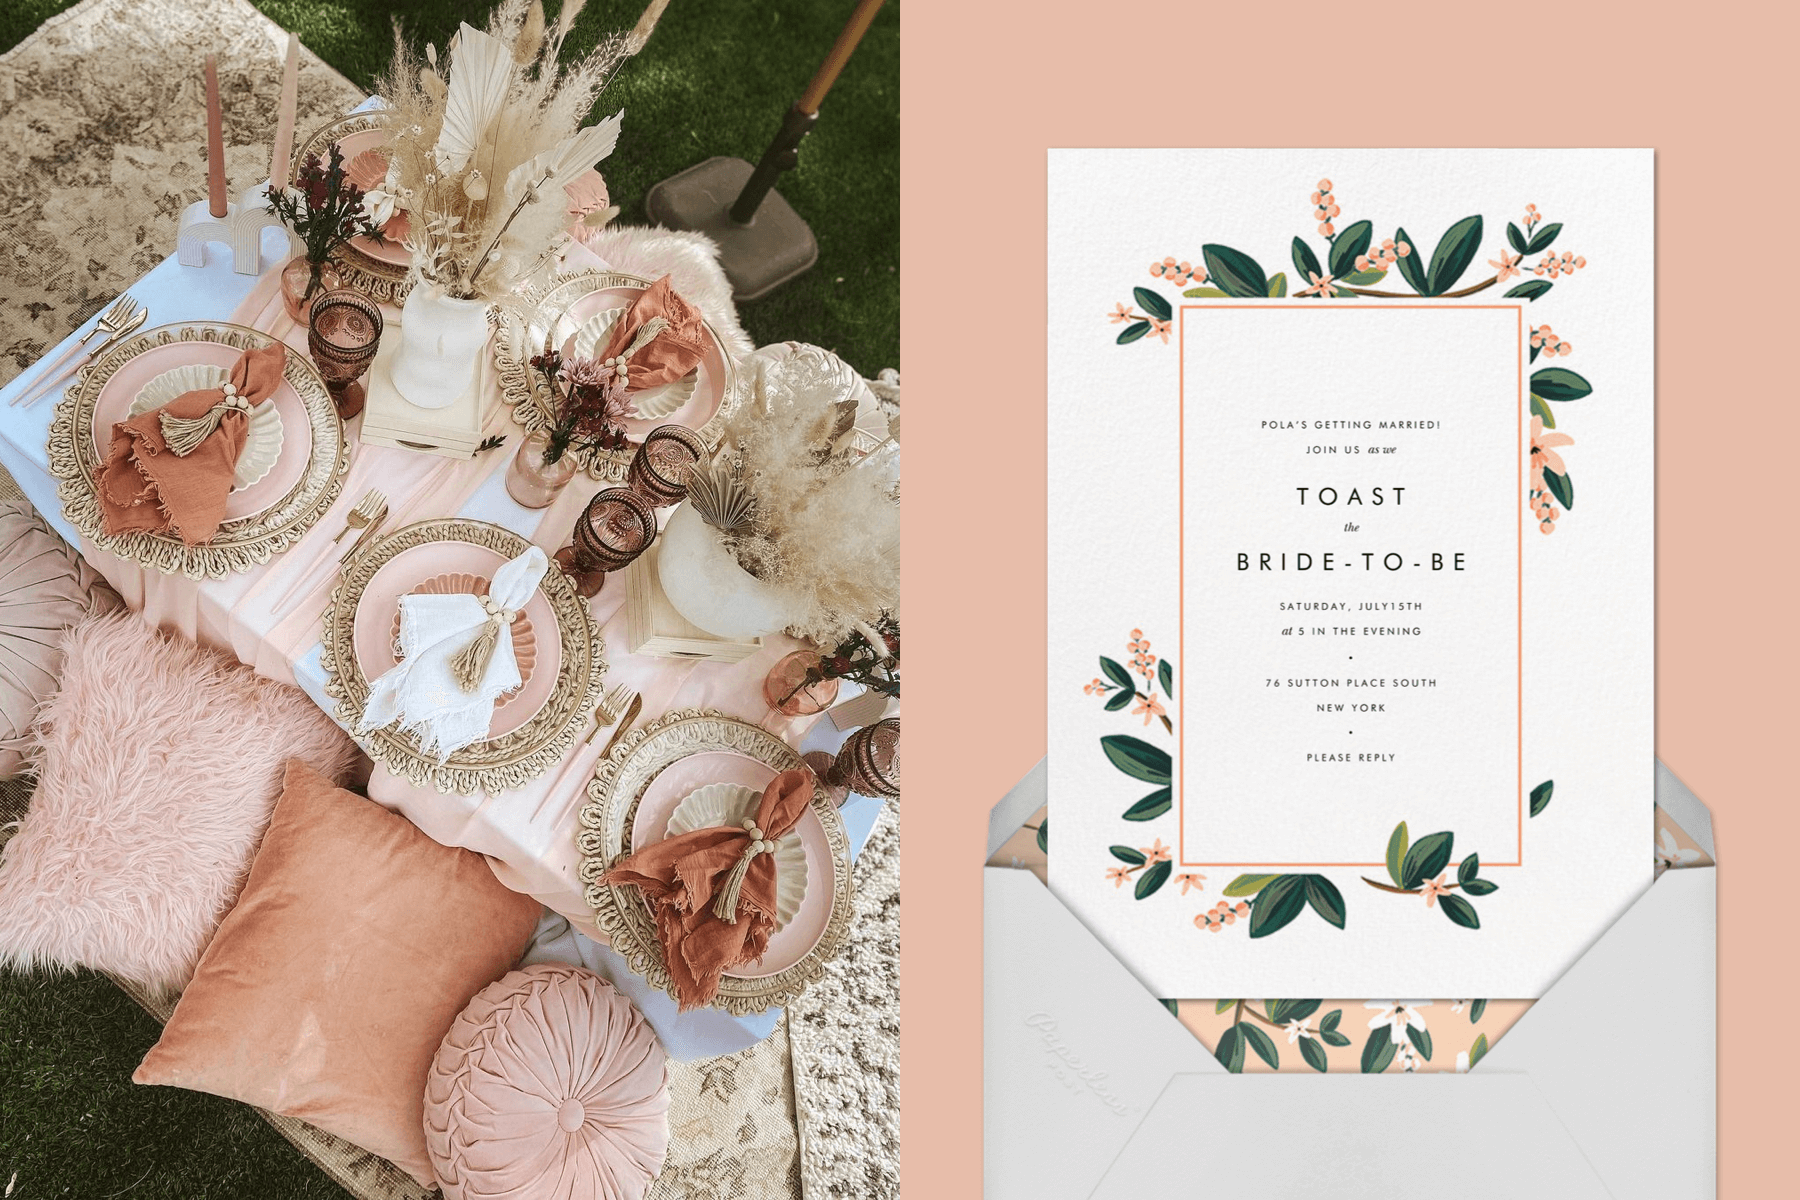 left: A boho-style picnic for six with a blush pink palette. Right: A bridal shower invitation with a thin border of illustrated small pink flowers and green leaves.